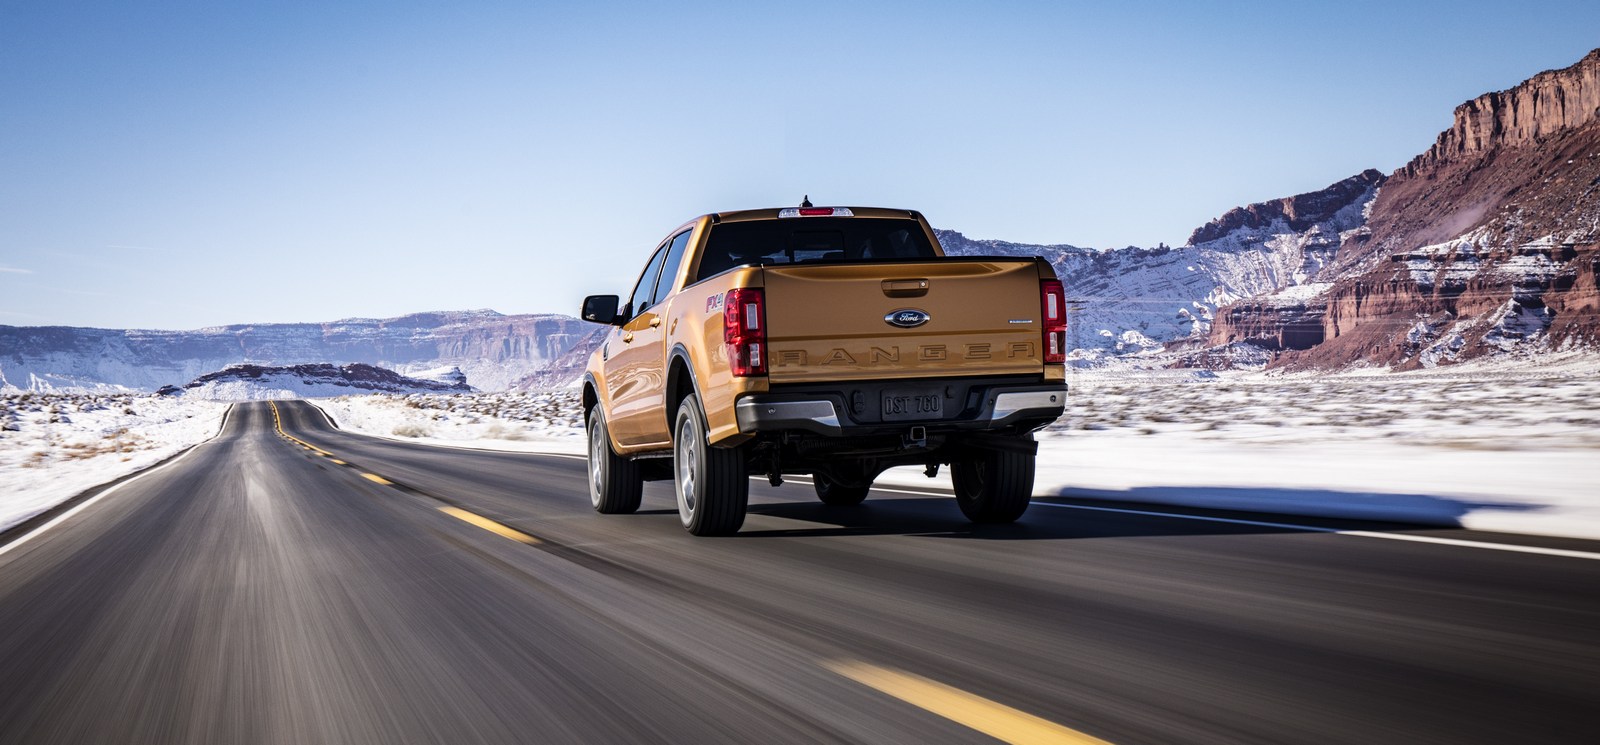 The all-new 2019 Ford Ranger for North America brings midsize truck fans a new choice from America’s truck sales leader – one that’s engineered Built Ford Tough and packed with driver-assist technologies to make driving easier whether on- or off-road.